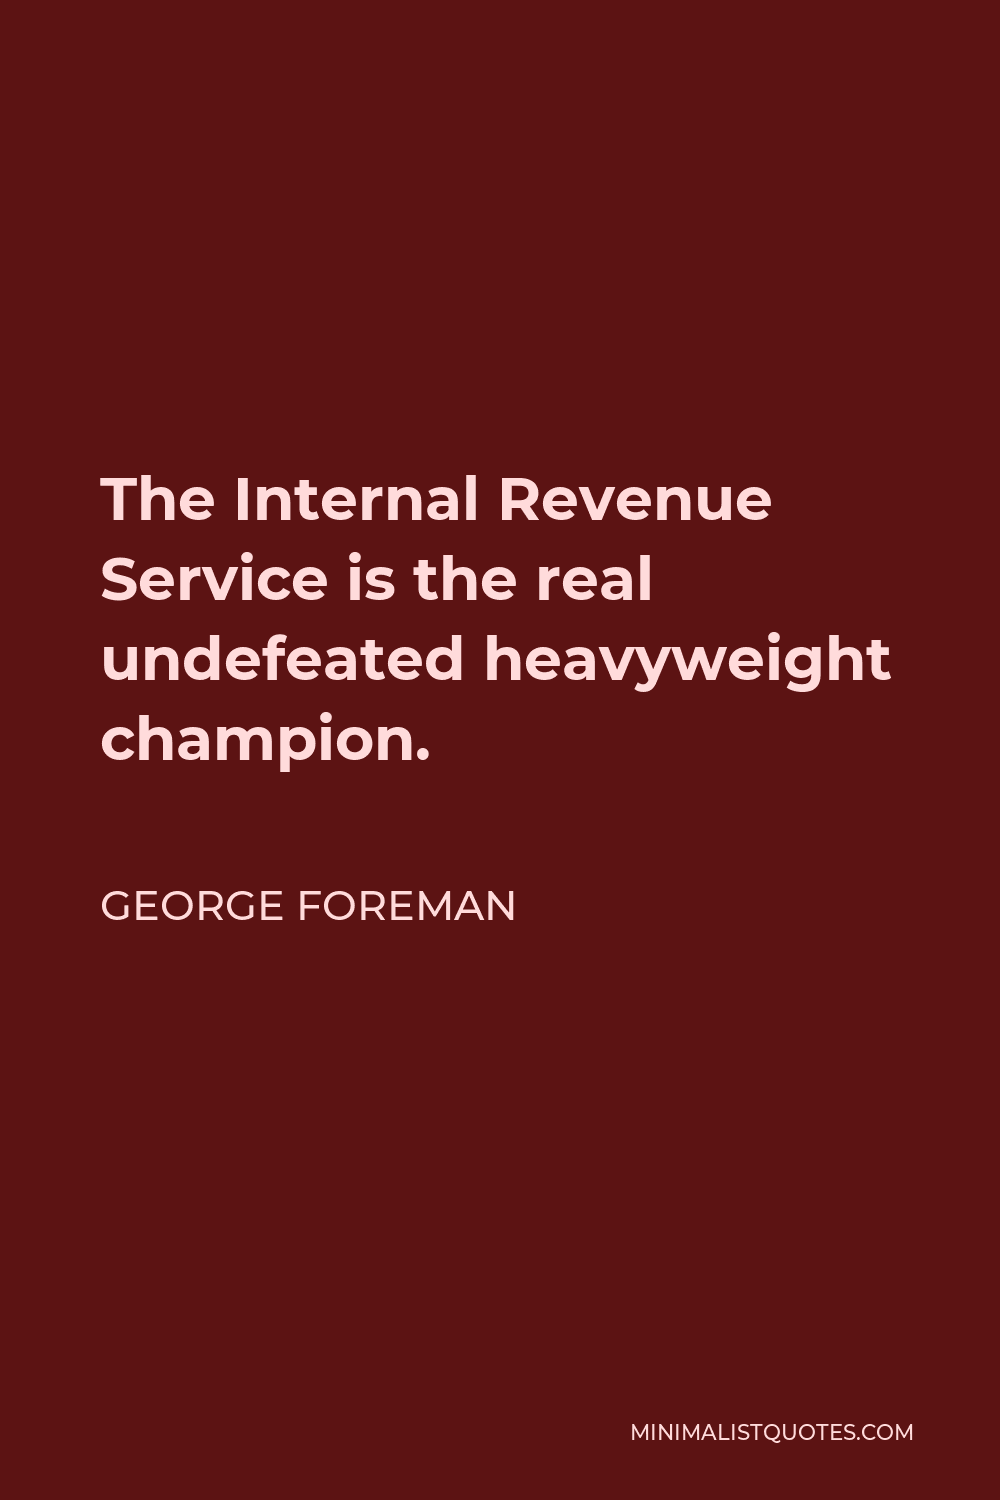 George Foreman Quote - The Internal Revenue Service is the real undefeated heavyweight champion.